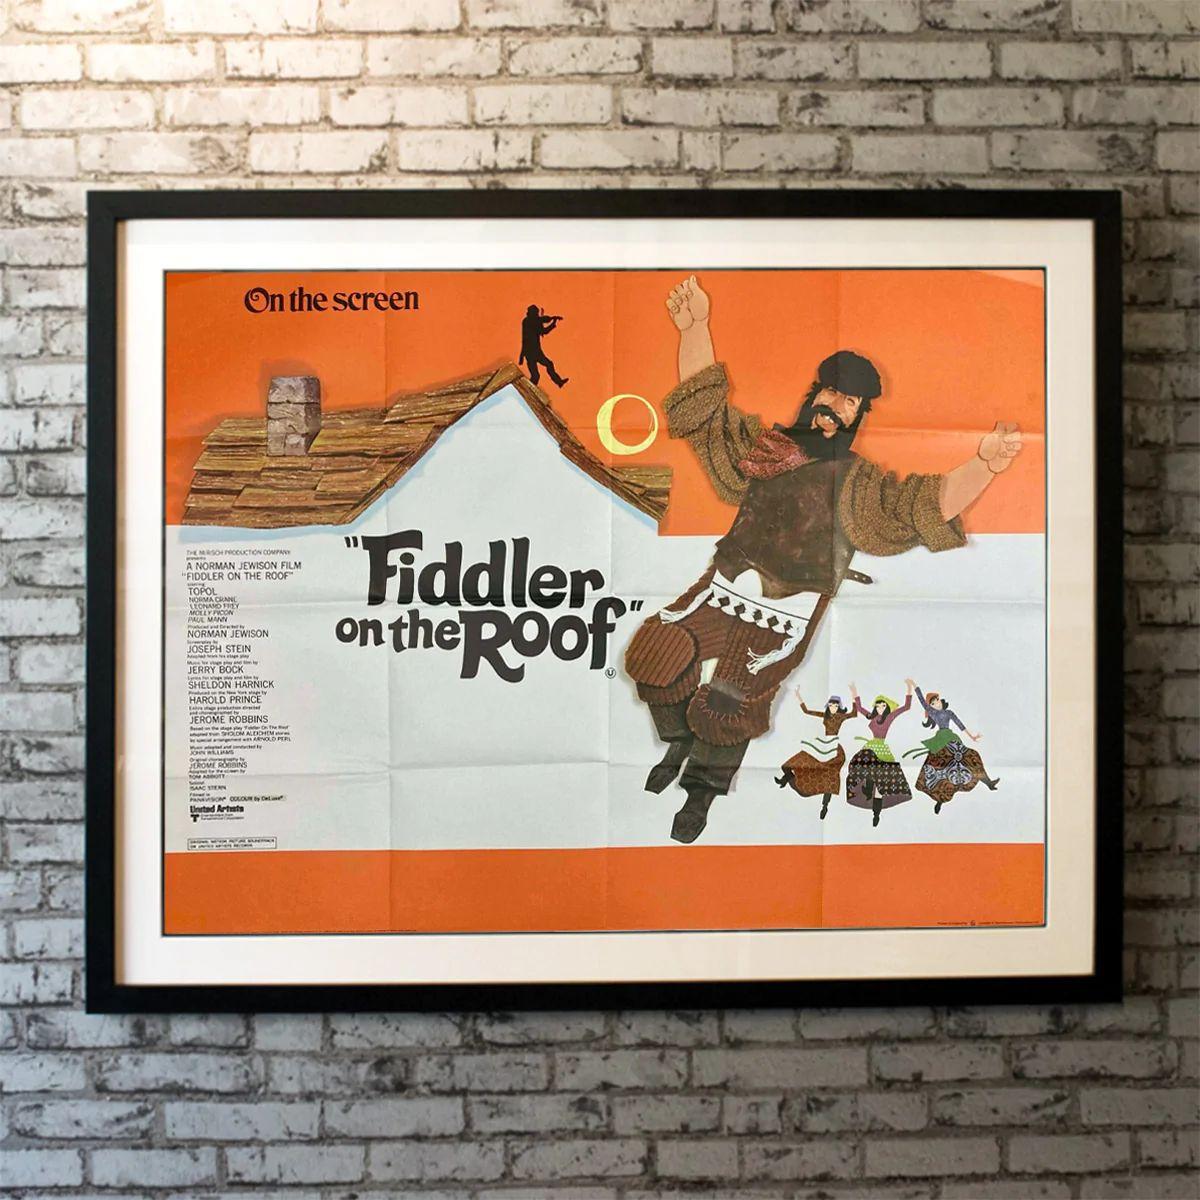 Fiddler On The Roof, Unframed Poster, 1971

Original British Quad (30 X 40 Inches)

Shipping calculated at checkout.
In pre-revolutionary Russia, a Jewish peasant with traditional values contends with marrying off three of his daughters with modern